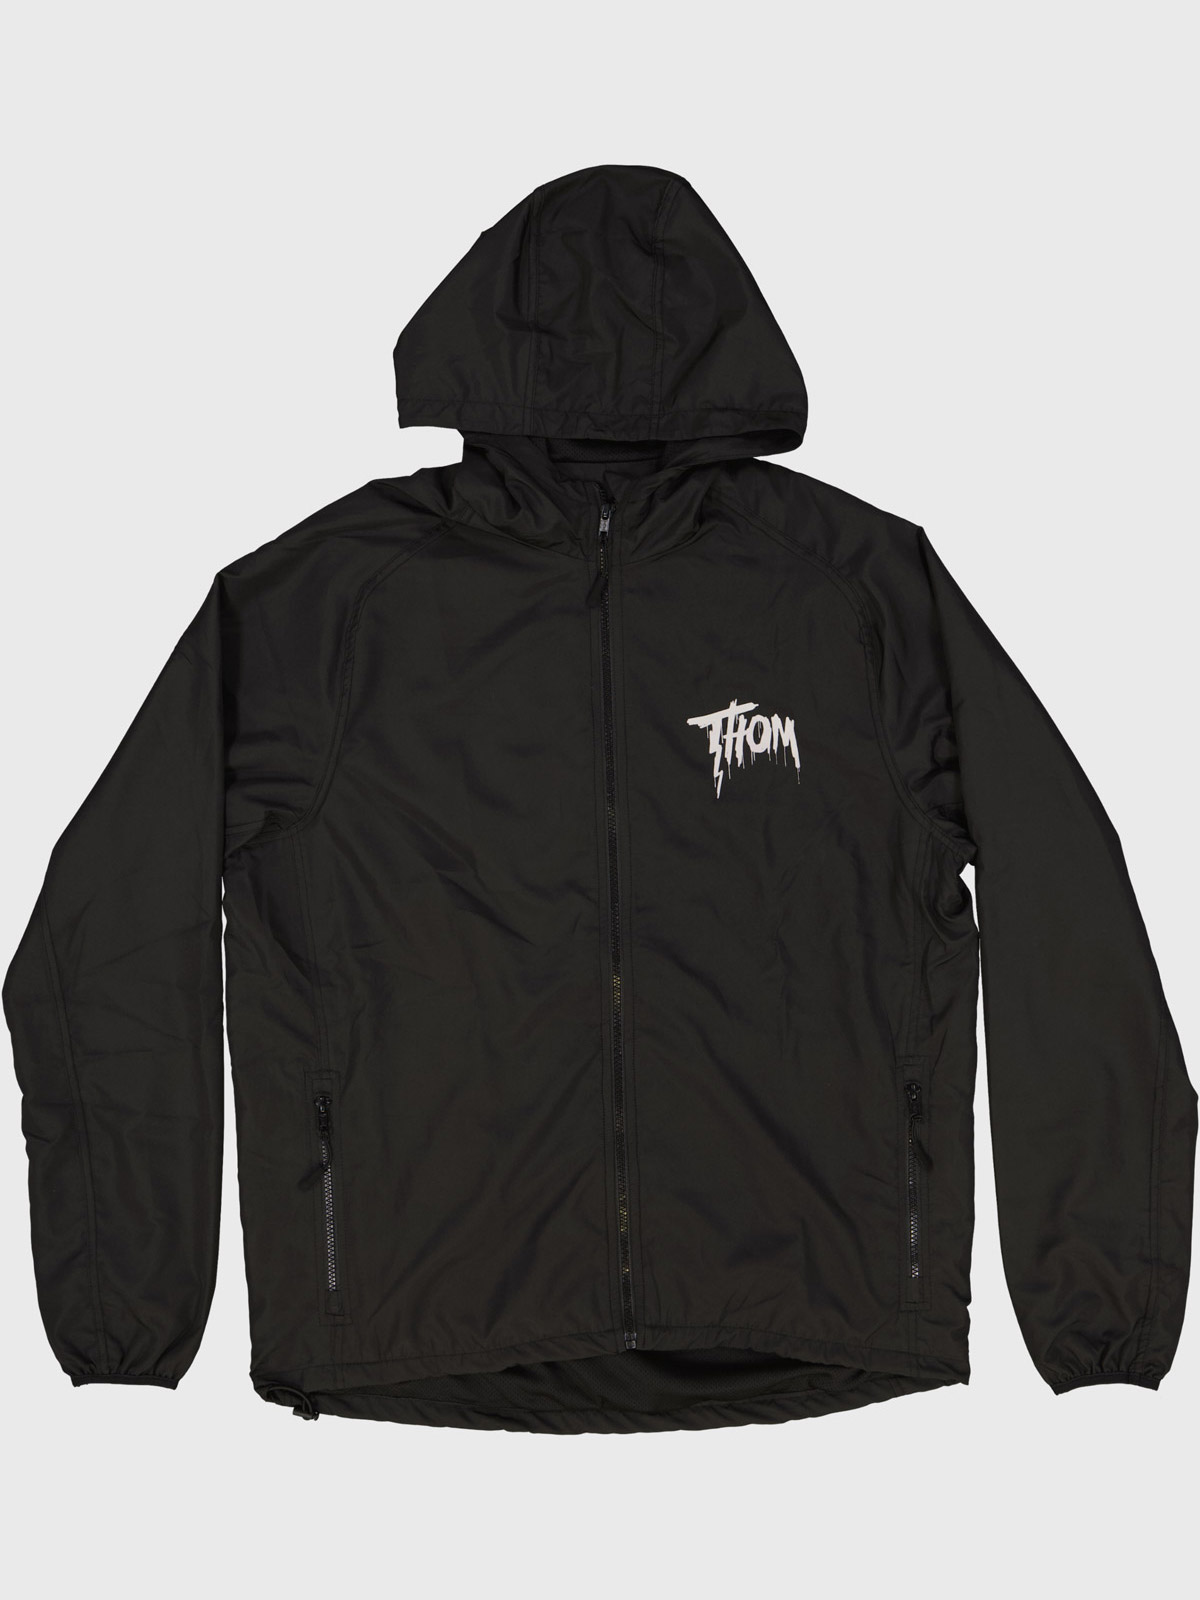 DRIP ALL WEATHER JACKET | The House of Machines